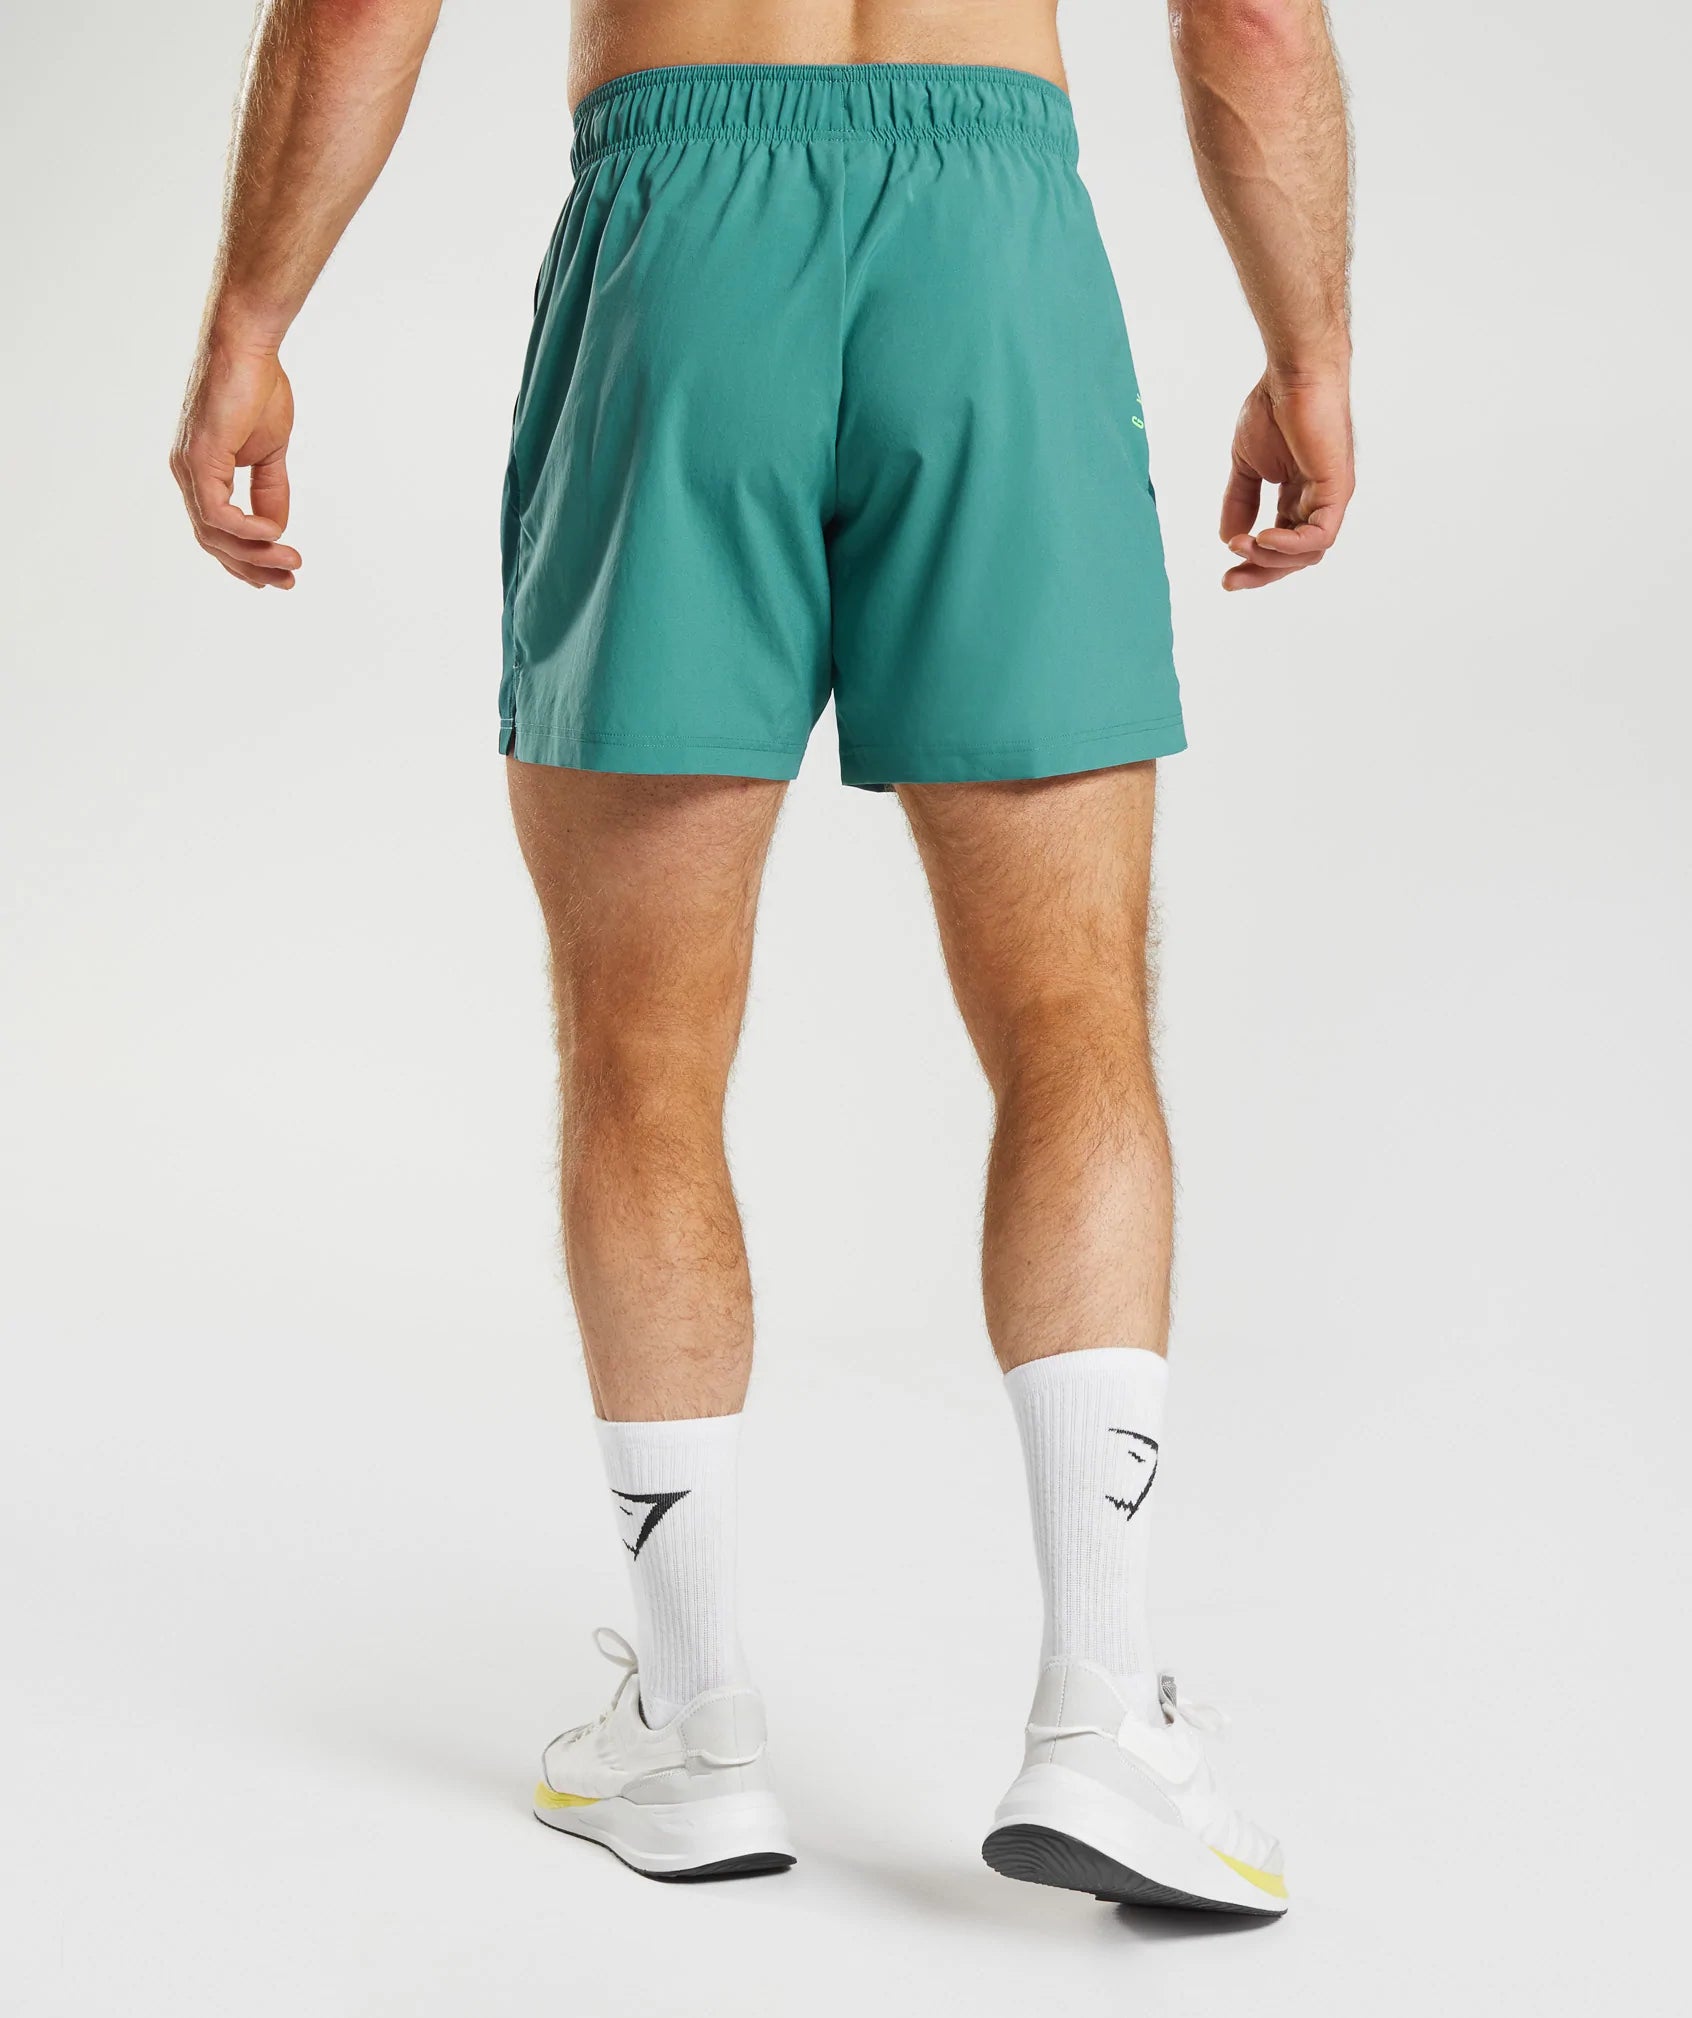 Sport Shorts in Slate Blue/Winter Teal - view 2